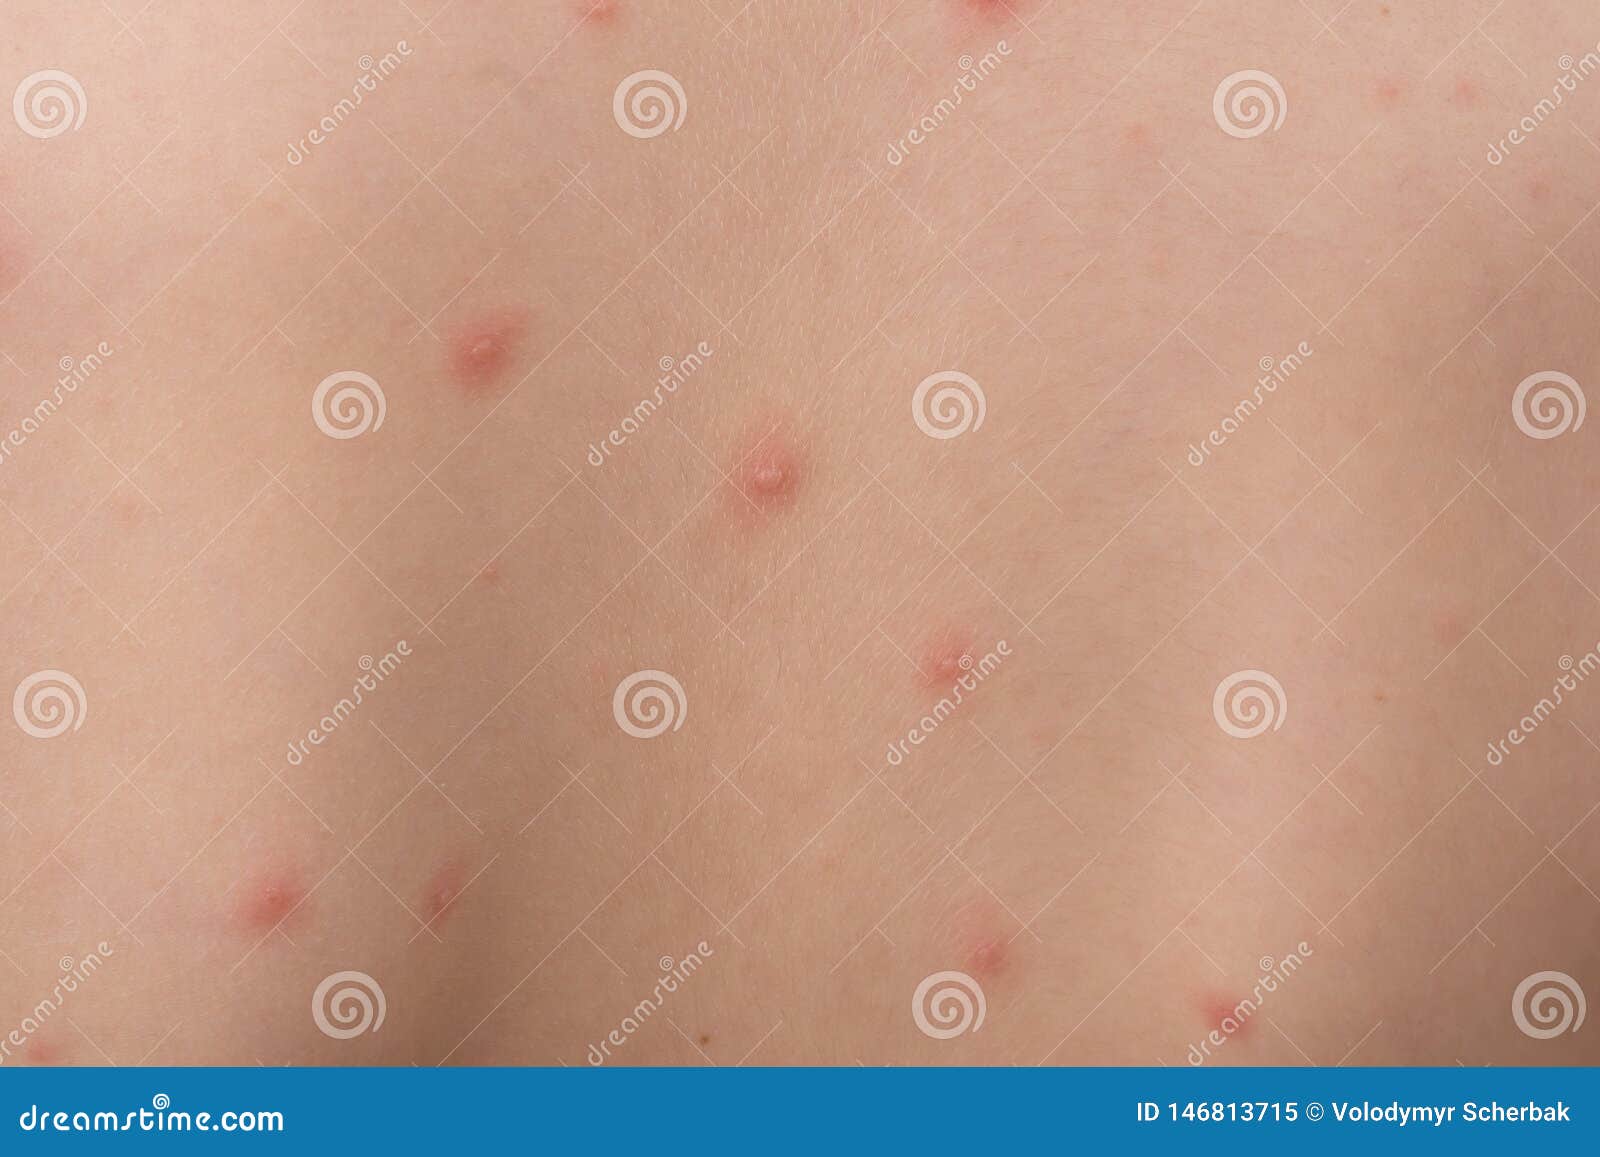 Chicken Pox Rash On Young Boy Body Chickenpox Is An Infection Caused By The Varicella Zoster Virus It Begins As A Blister Like Stock Image Image Of Infection Measles